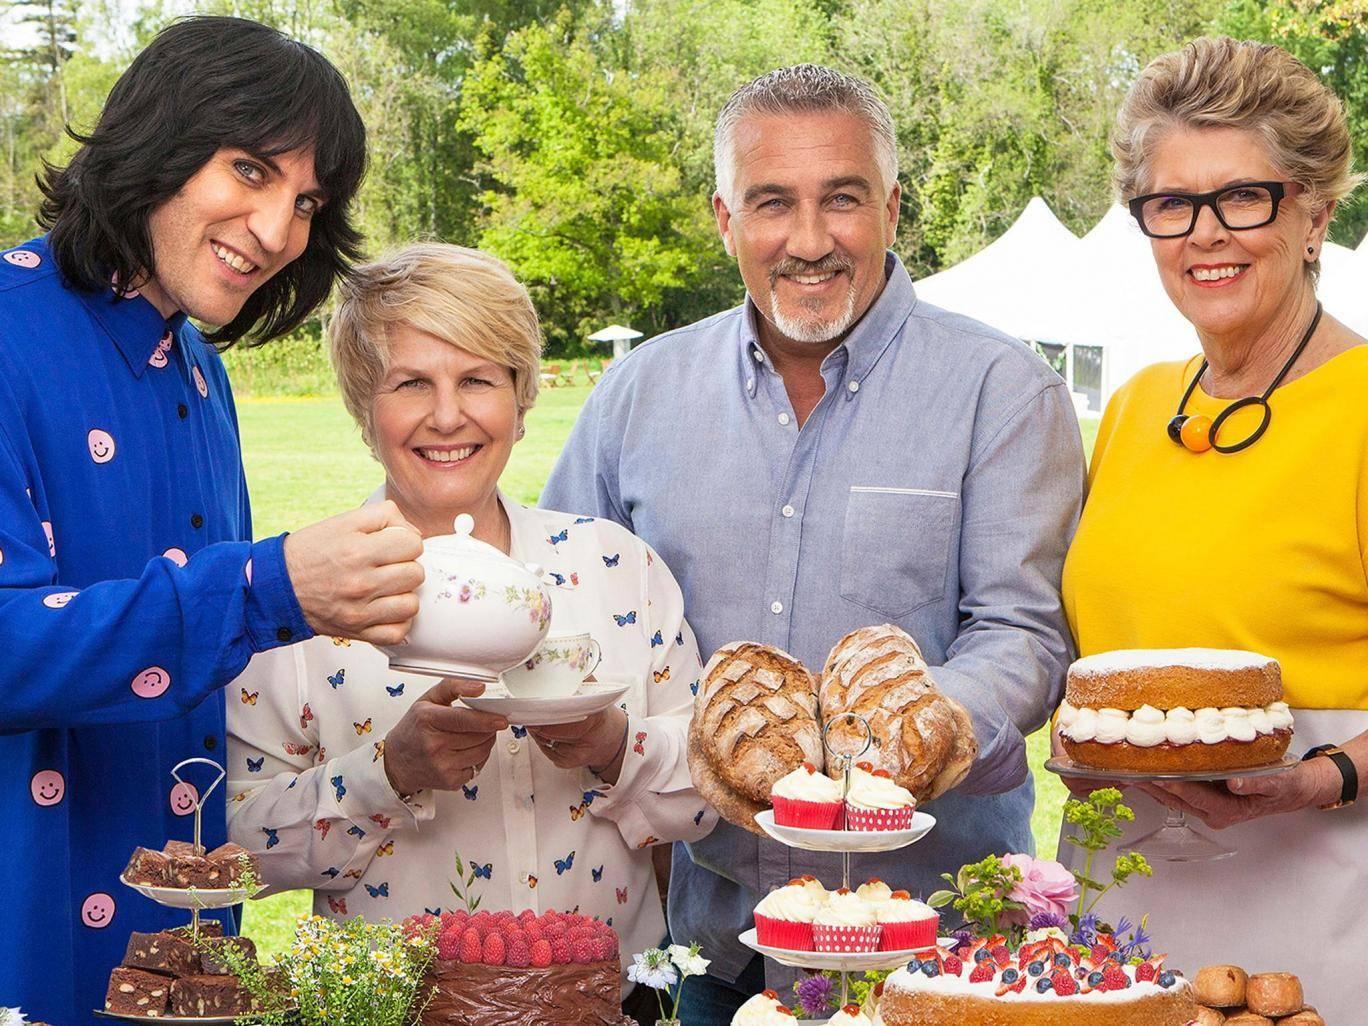 Prue Leith and Paul Hollywood will return for the upcoming series of the popular and competitive programme, alongside Noel Fielding and Sandi Toksvig